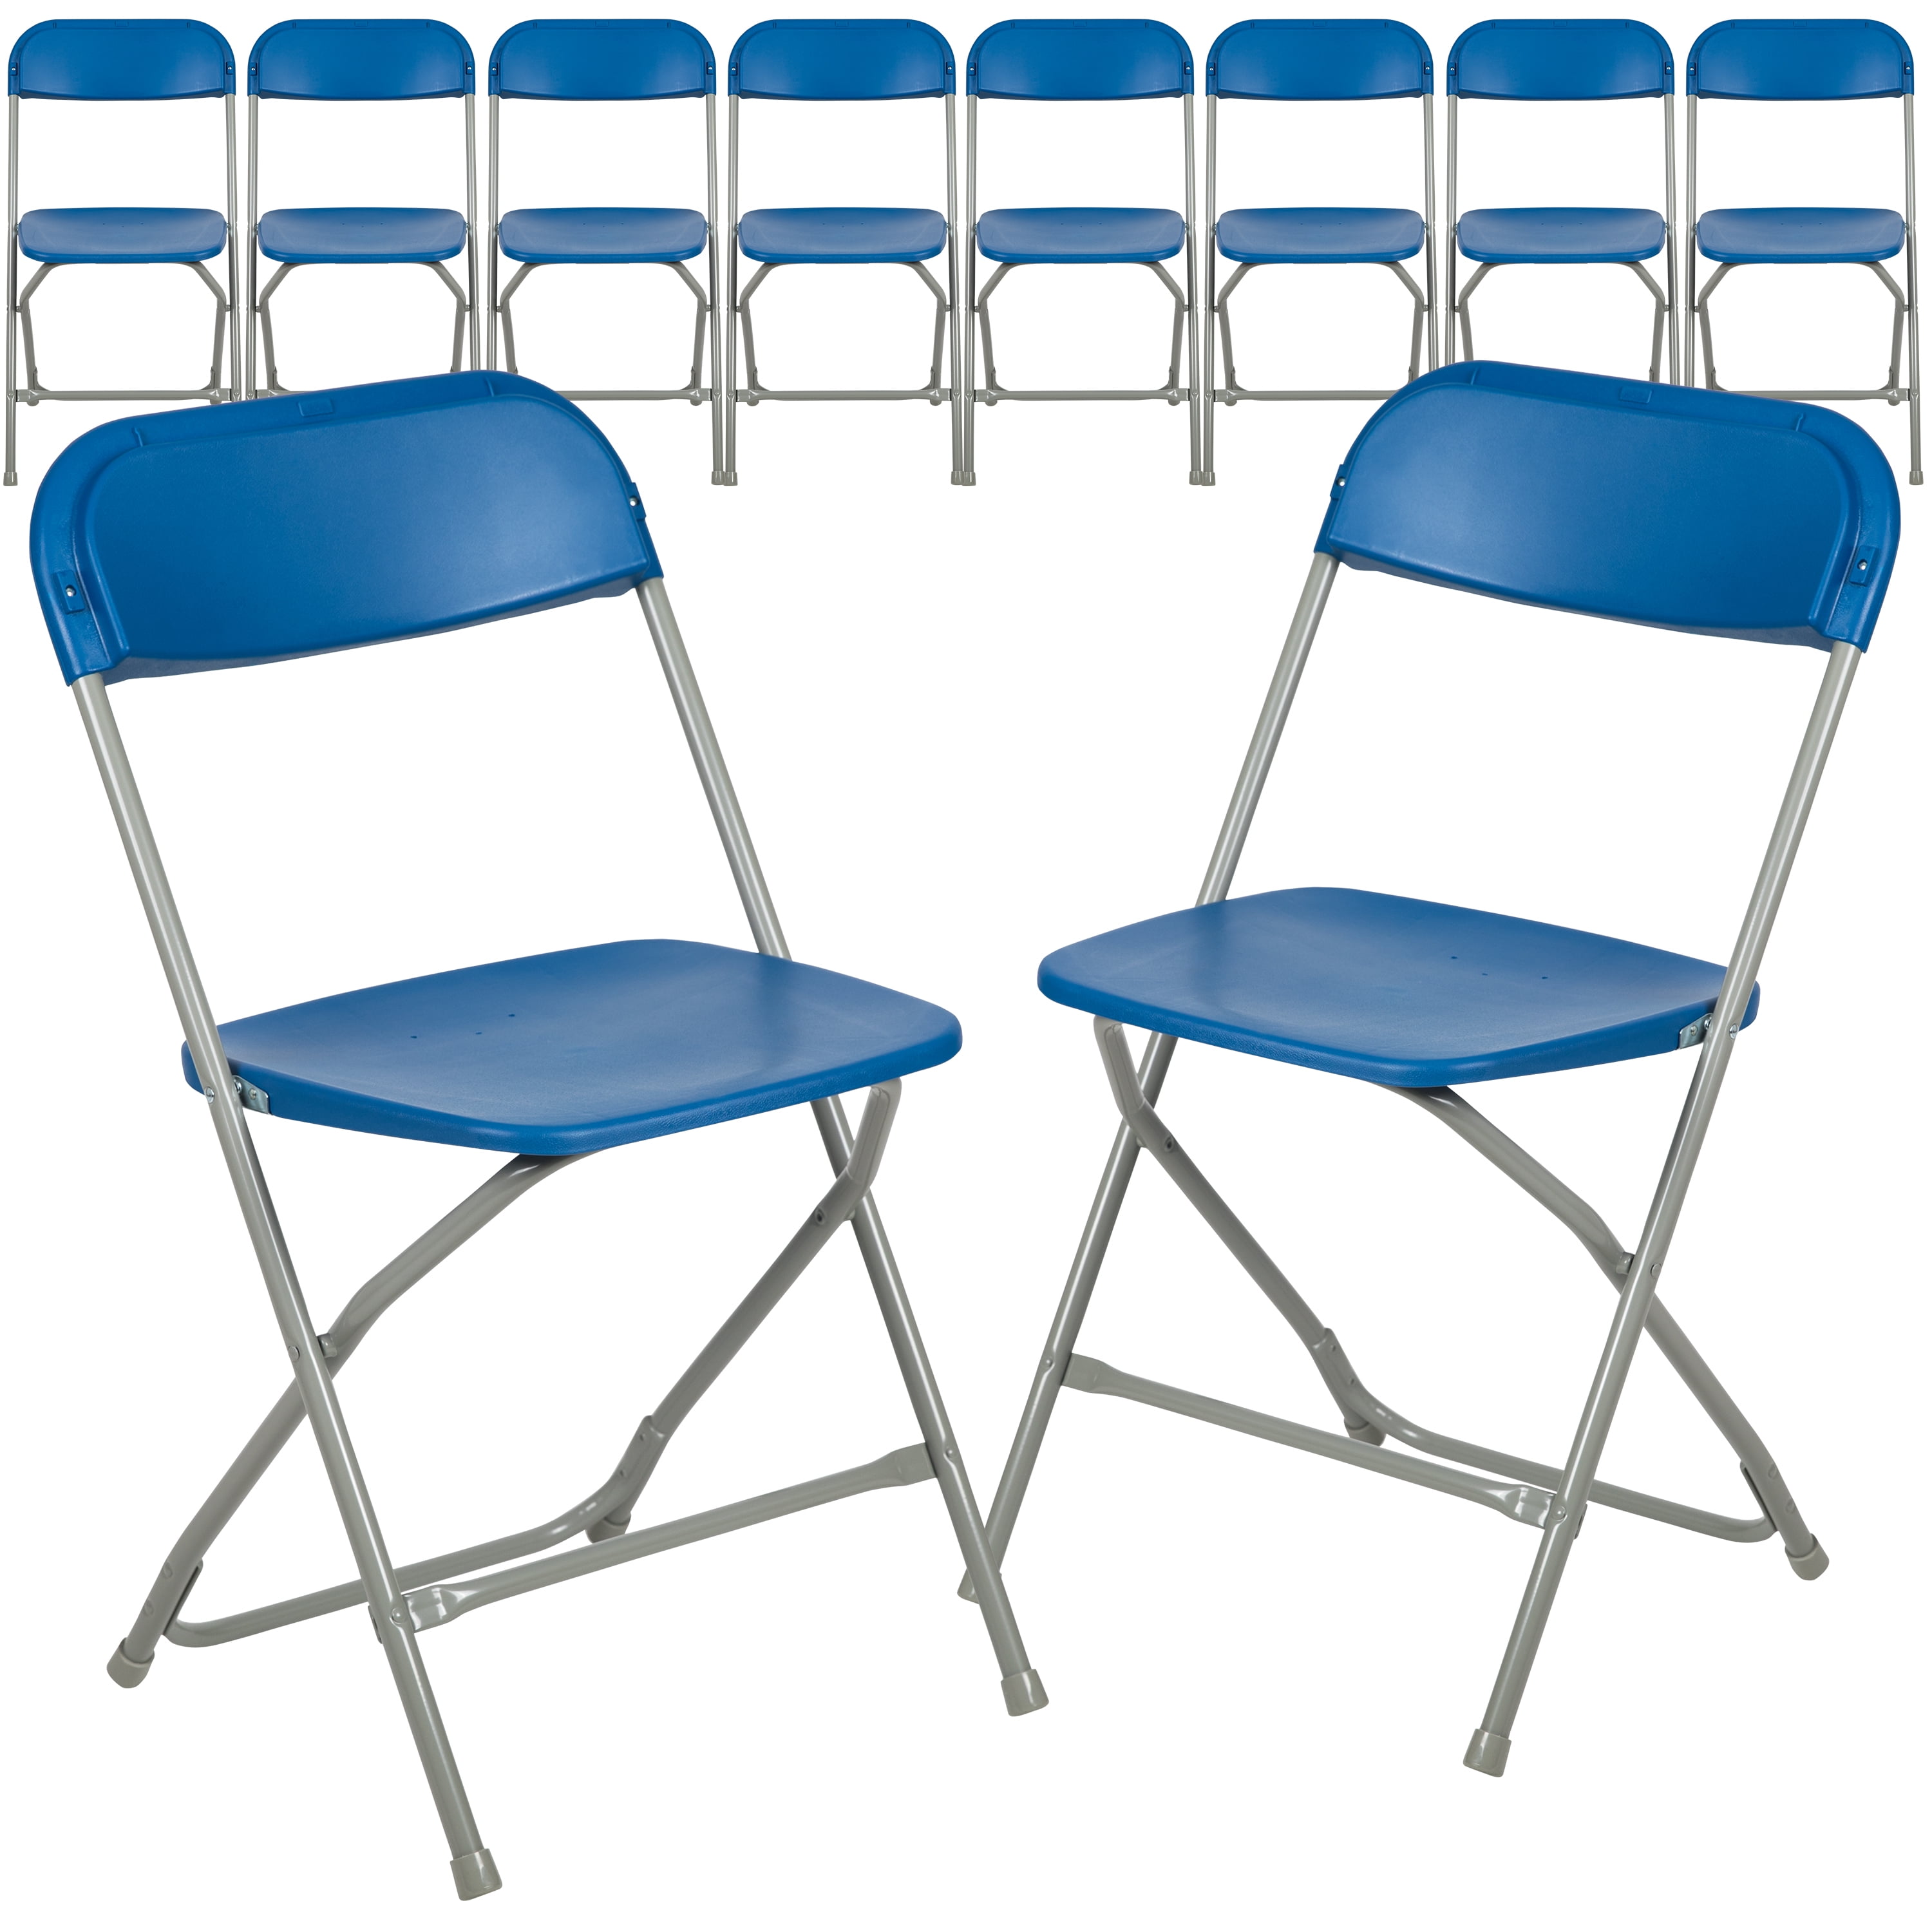 650 Lbs Weight Capacity Commercial Quality Black Plastic Folding Chairs 5 PACK 